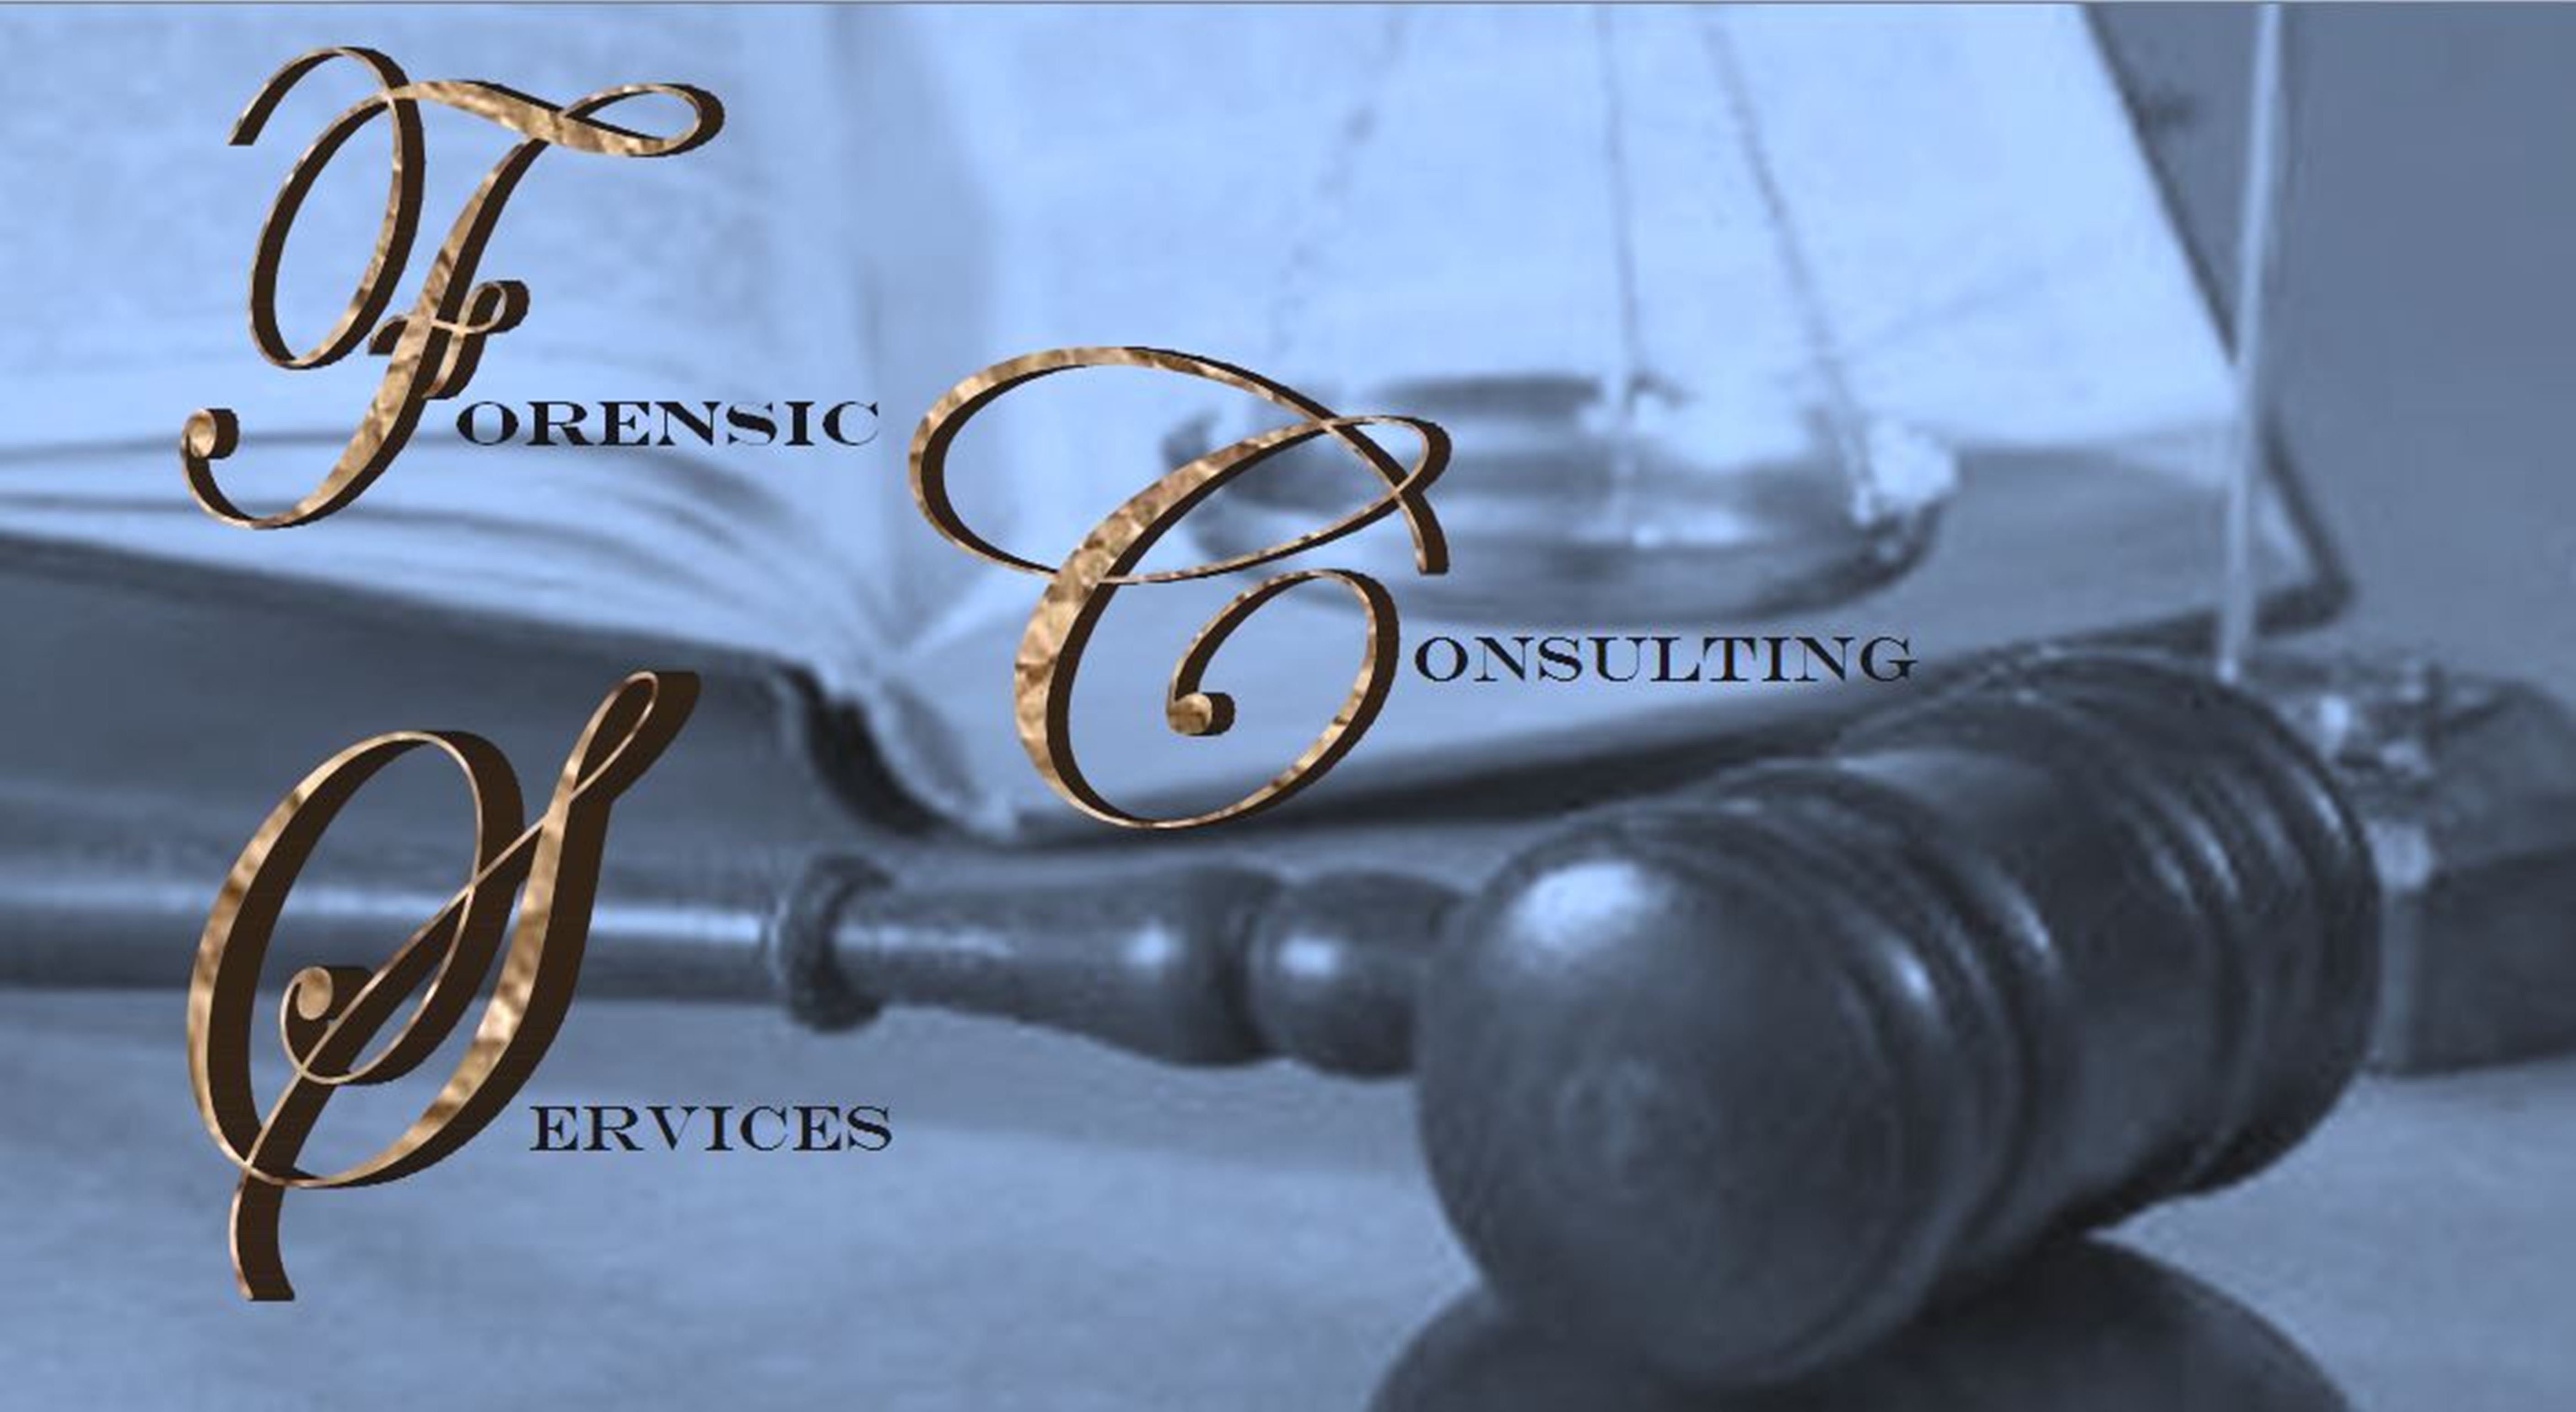 Forensic Consulting Services, LLC